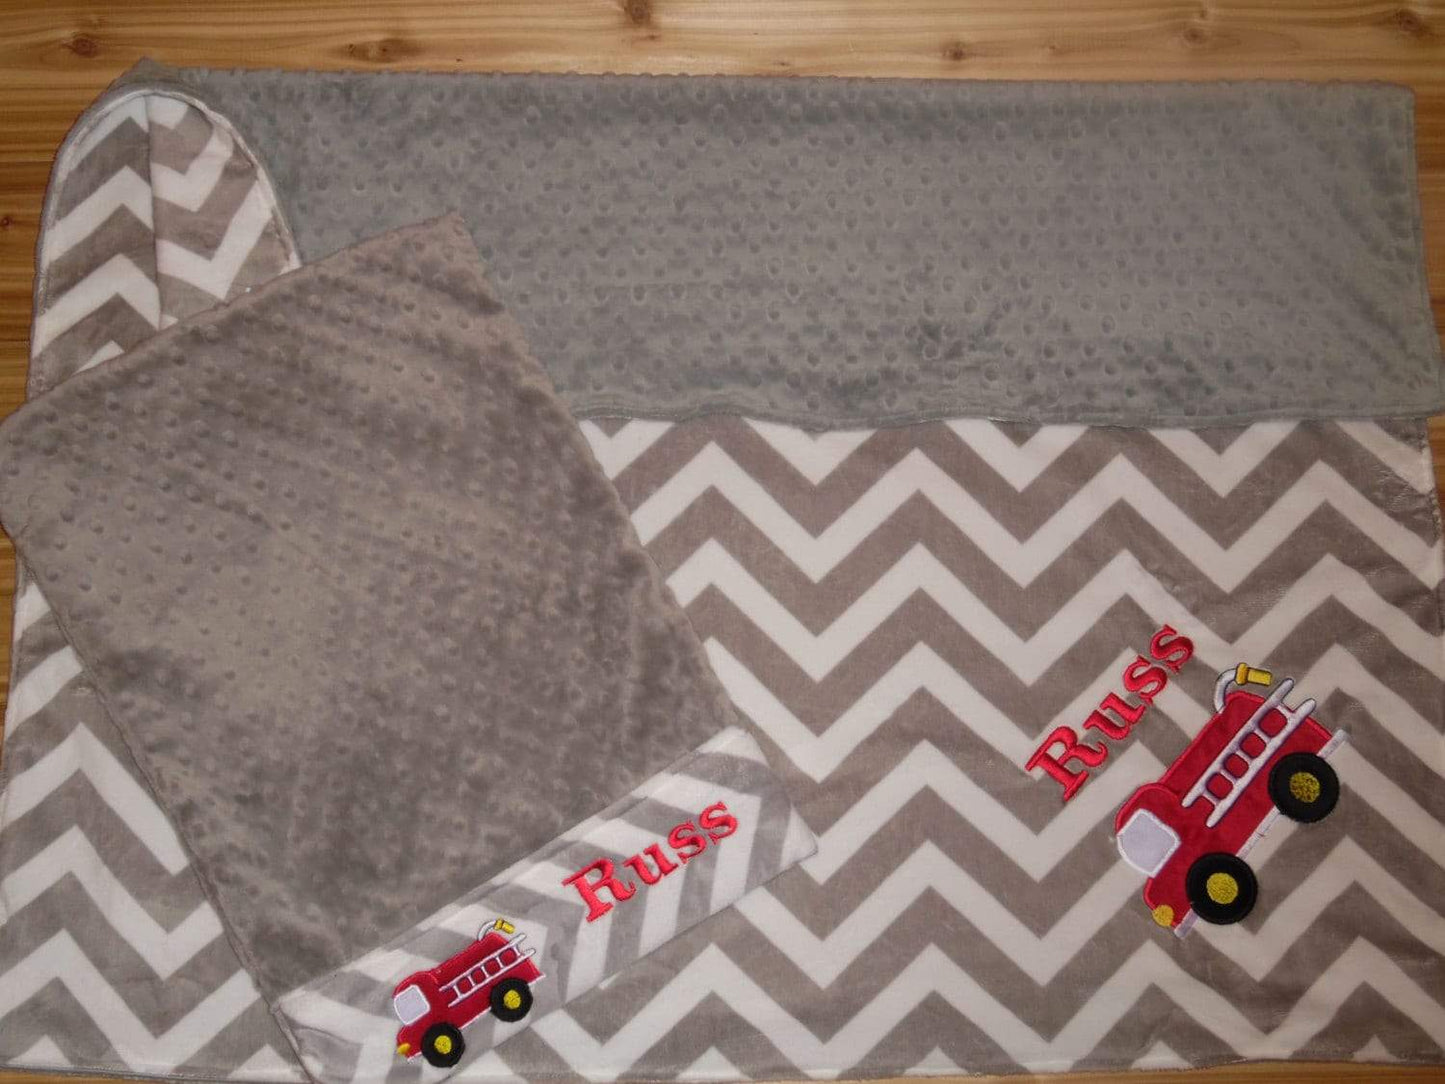 Firetruck Nap Set - Personalized Minky Blanket and Pillowcase with embroidered Firetruck - Travel or Standard Size